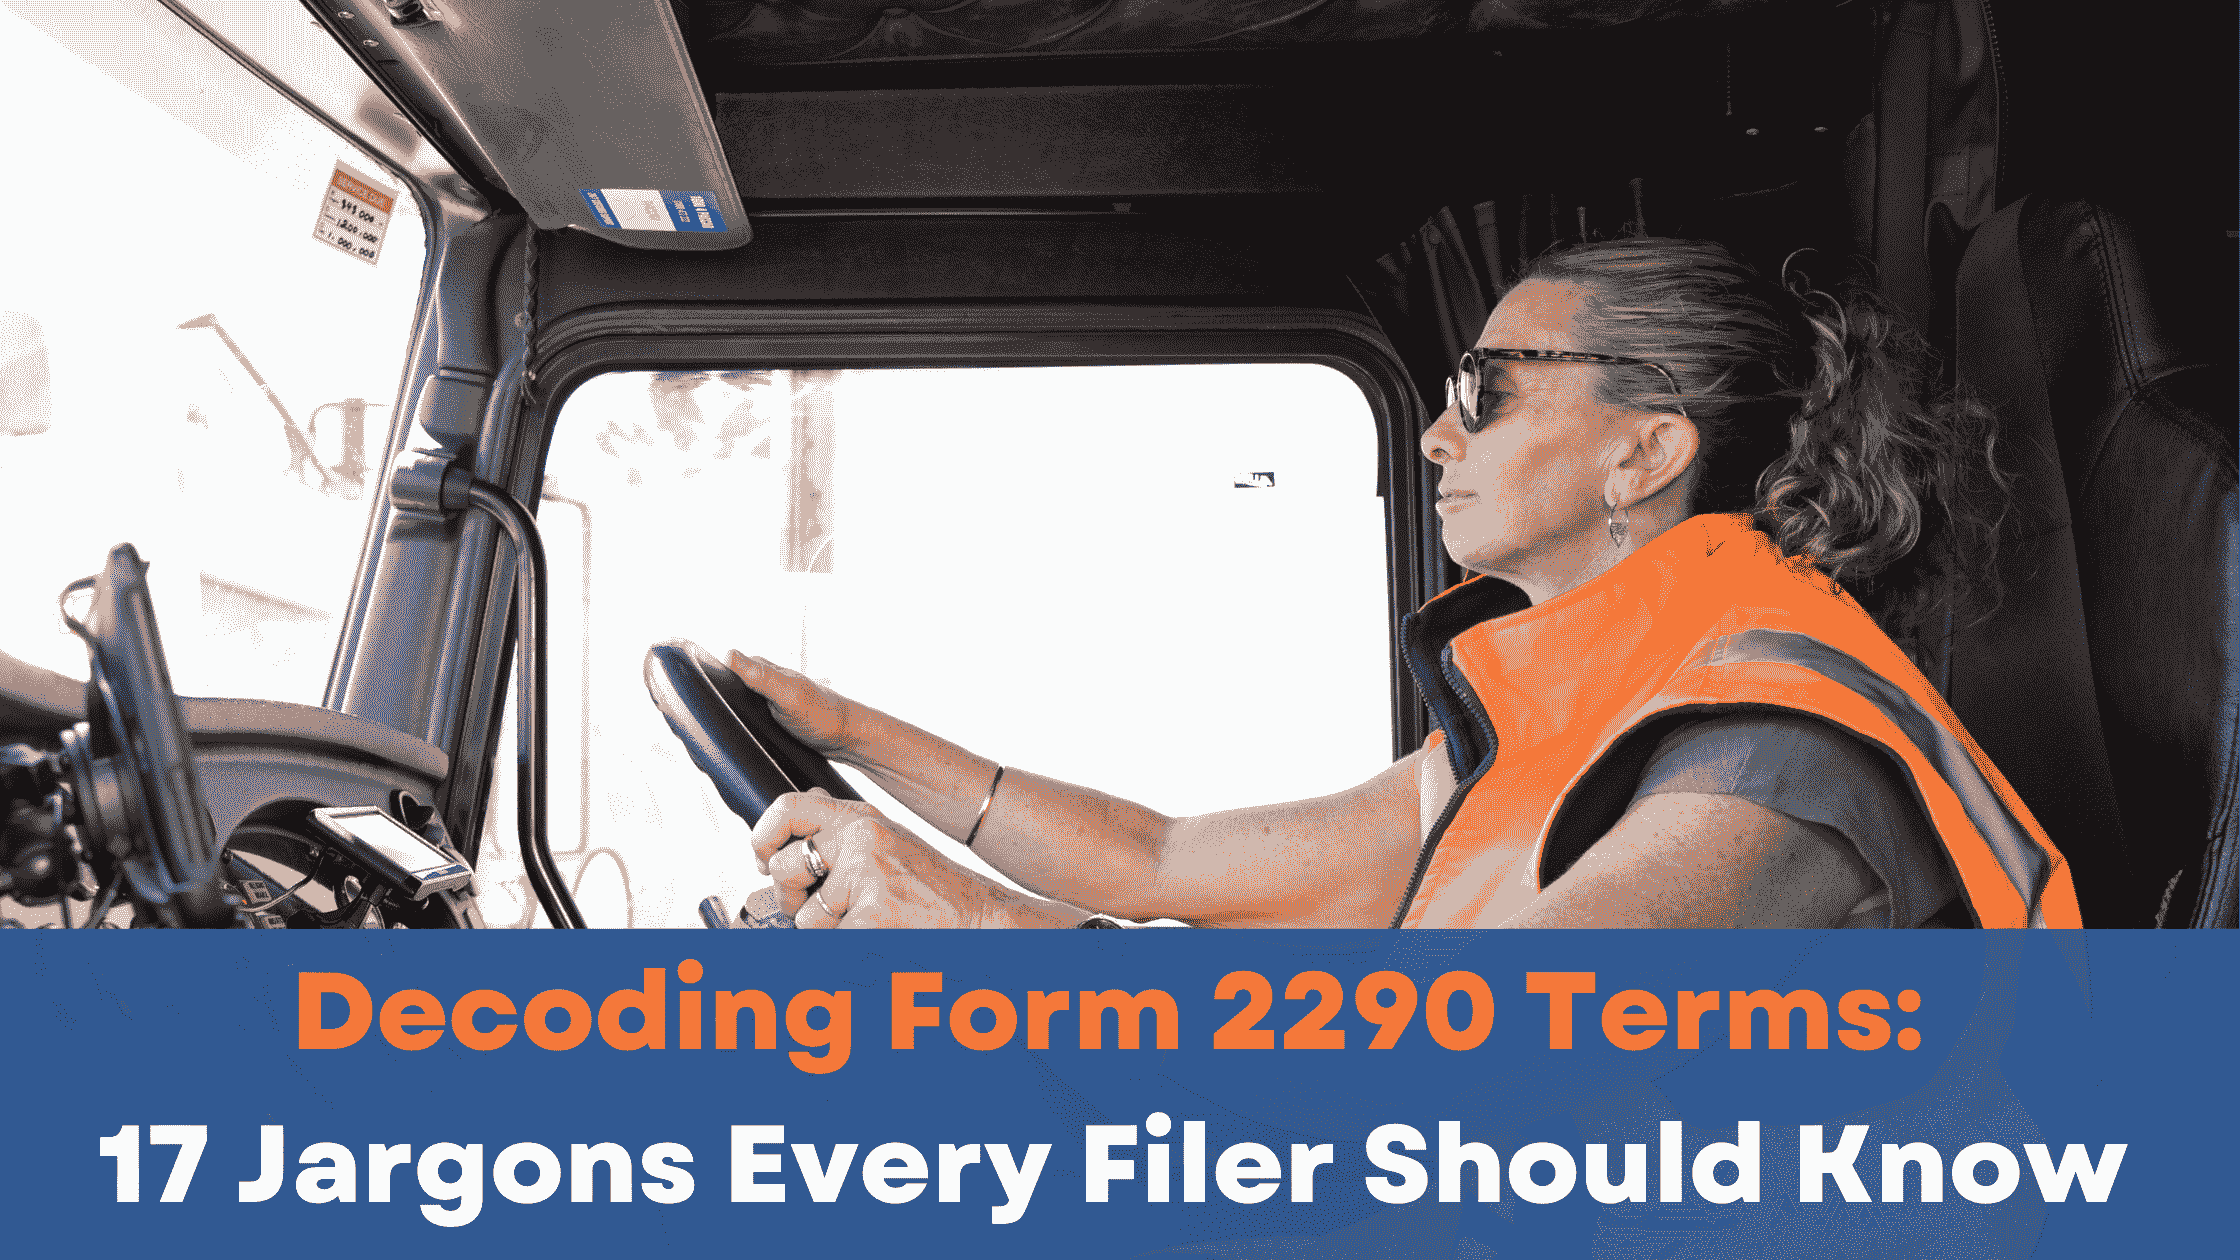 Decoding Form 2290 Terms: 17 Jargons Every Filer Should Know